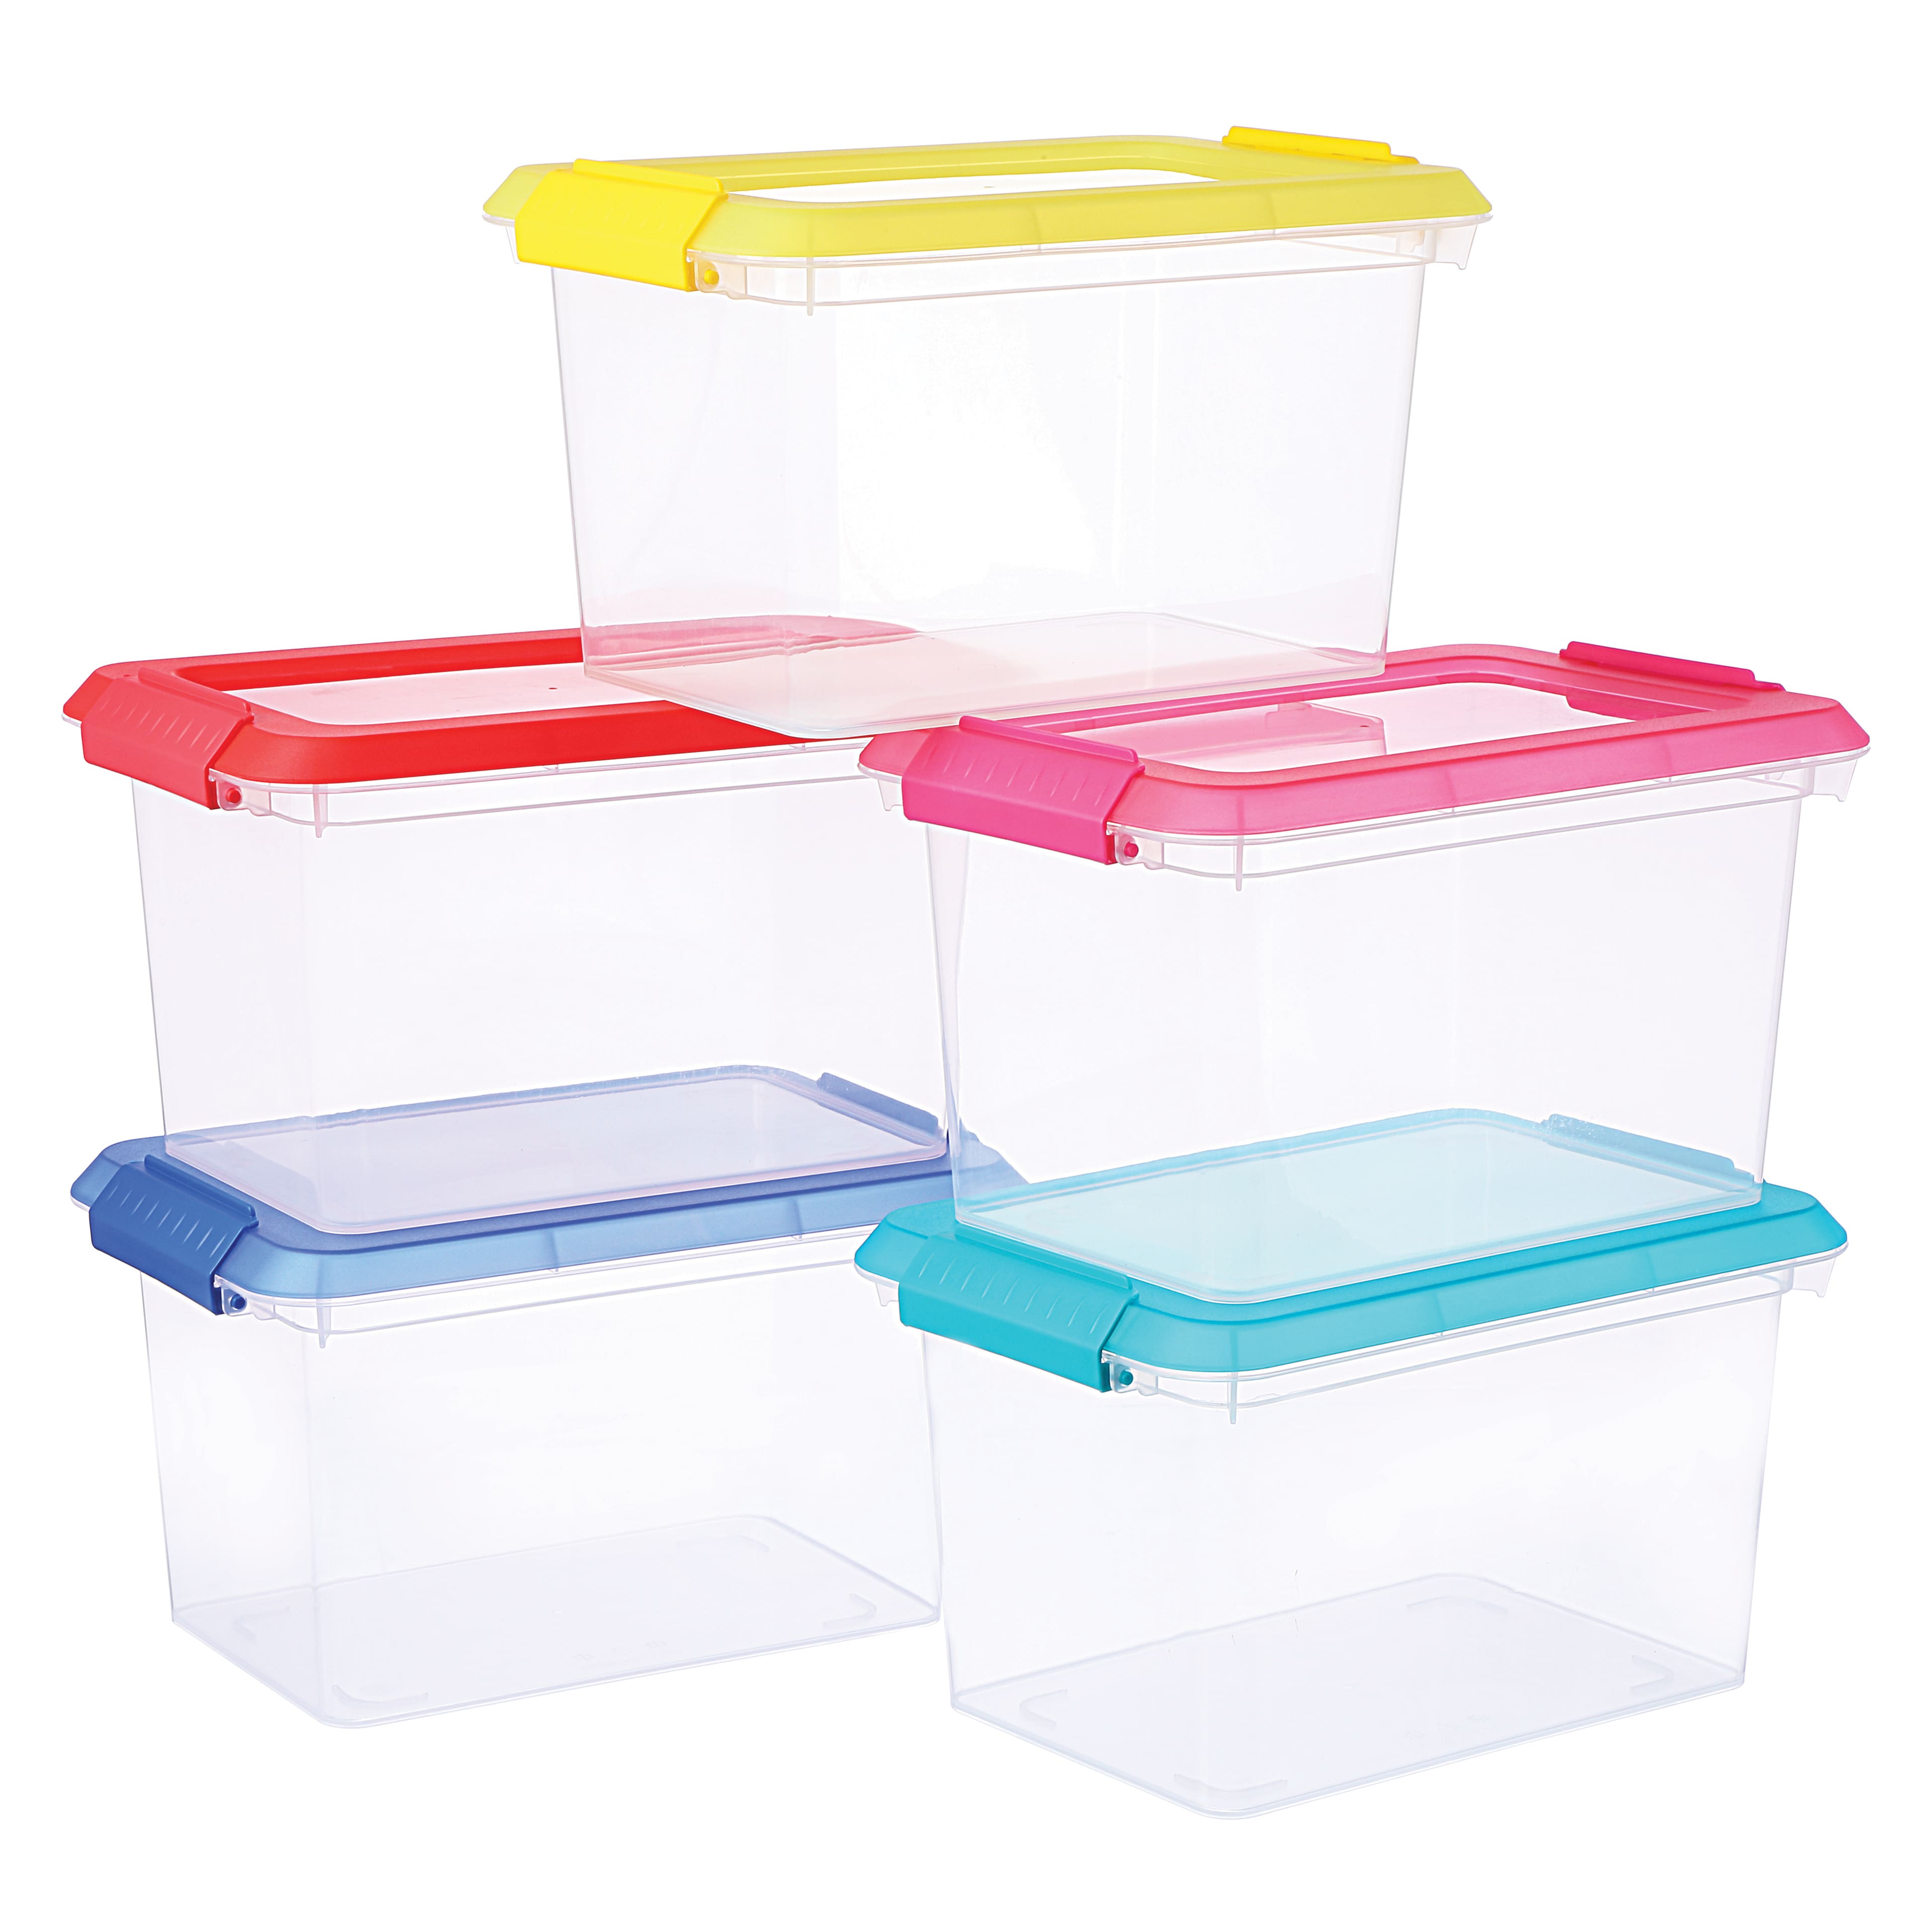 6 Packs: 5 ct. (30 total) 6.2qt. Storage Bins with Lids by Simply Tidy™